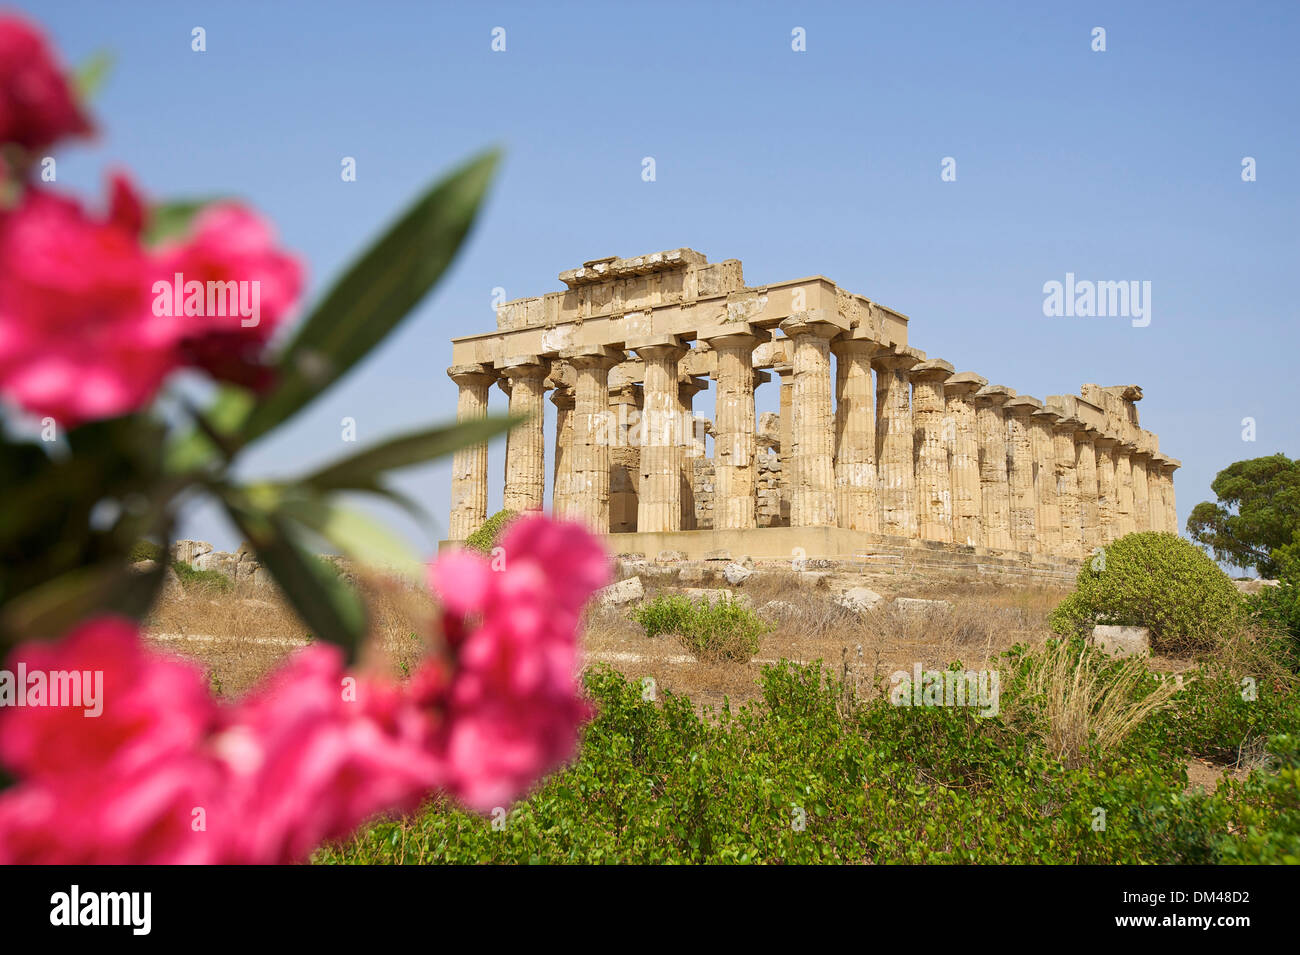 Sicily Italy South Italy Europe island temple of Hera Selinunt temple architecture building construction history historical Stock Photo